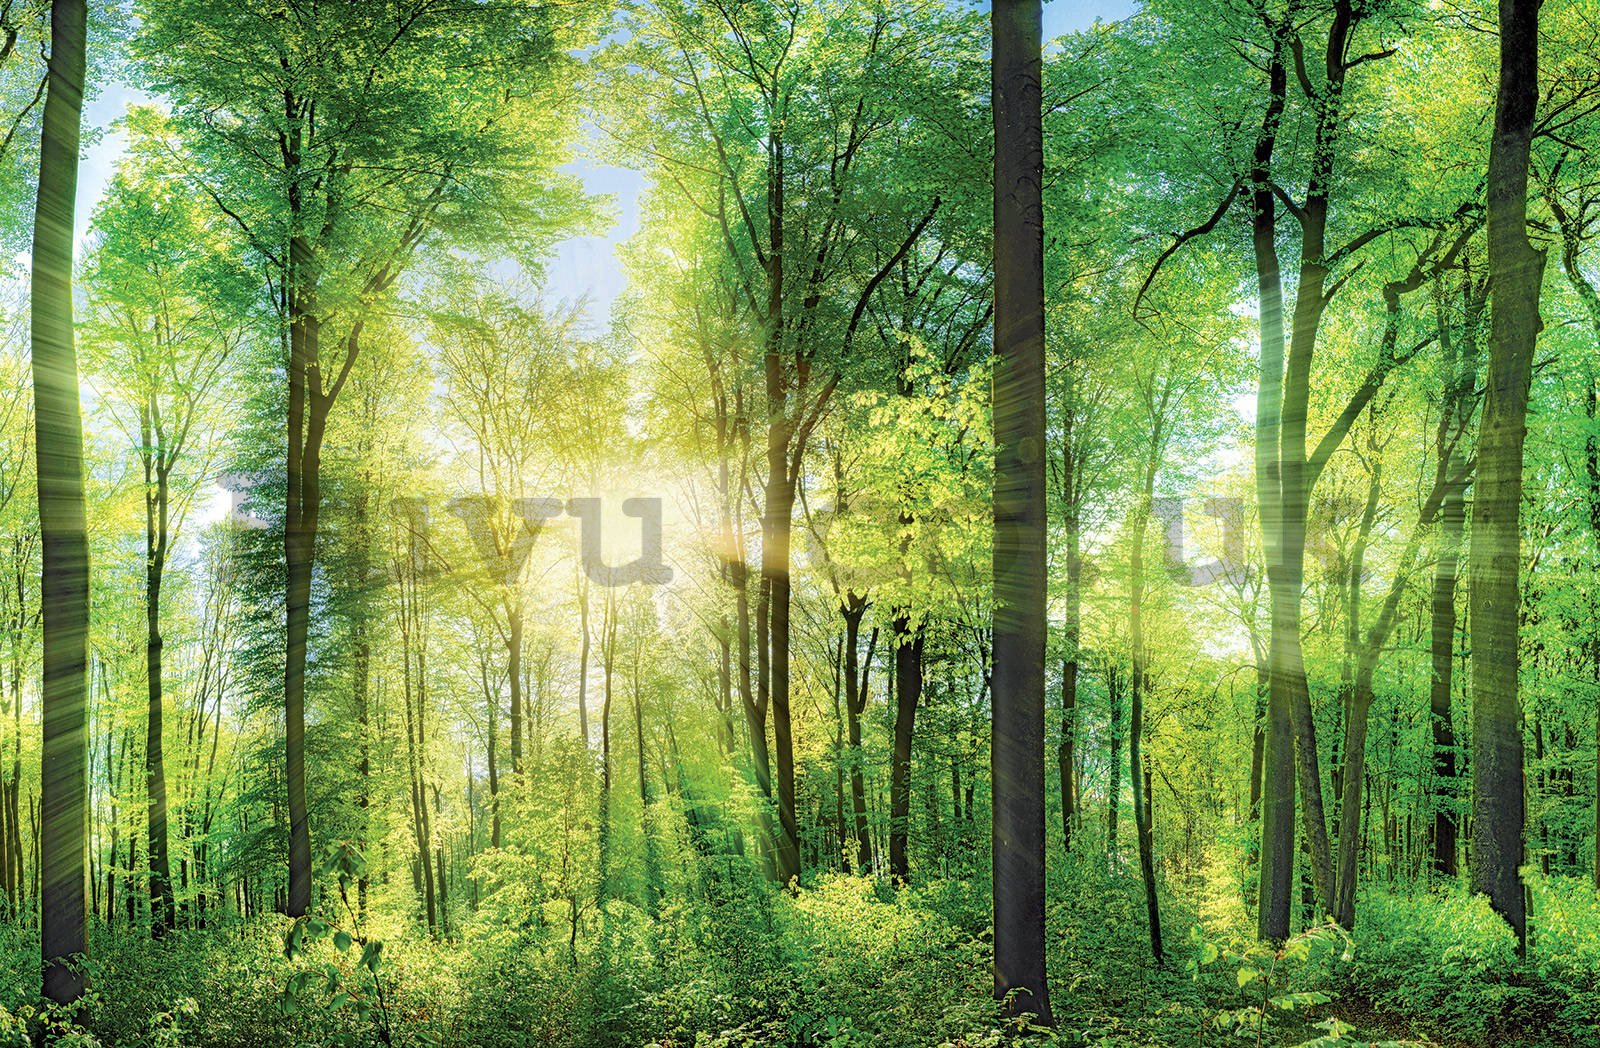 Painting on canvas: Green Forest (2) - 116x76 cm